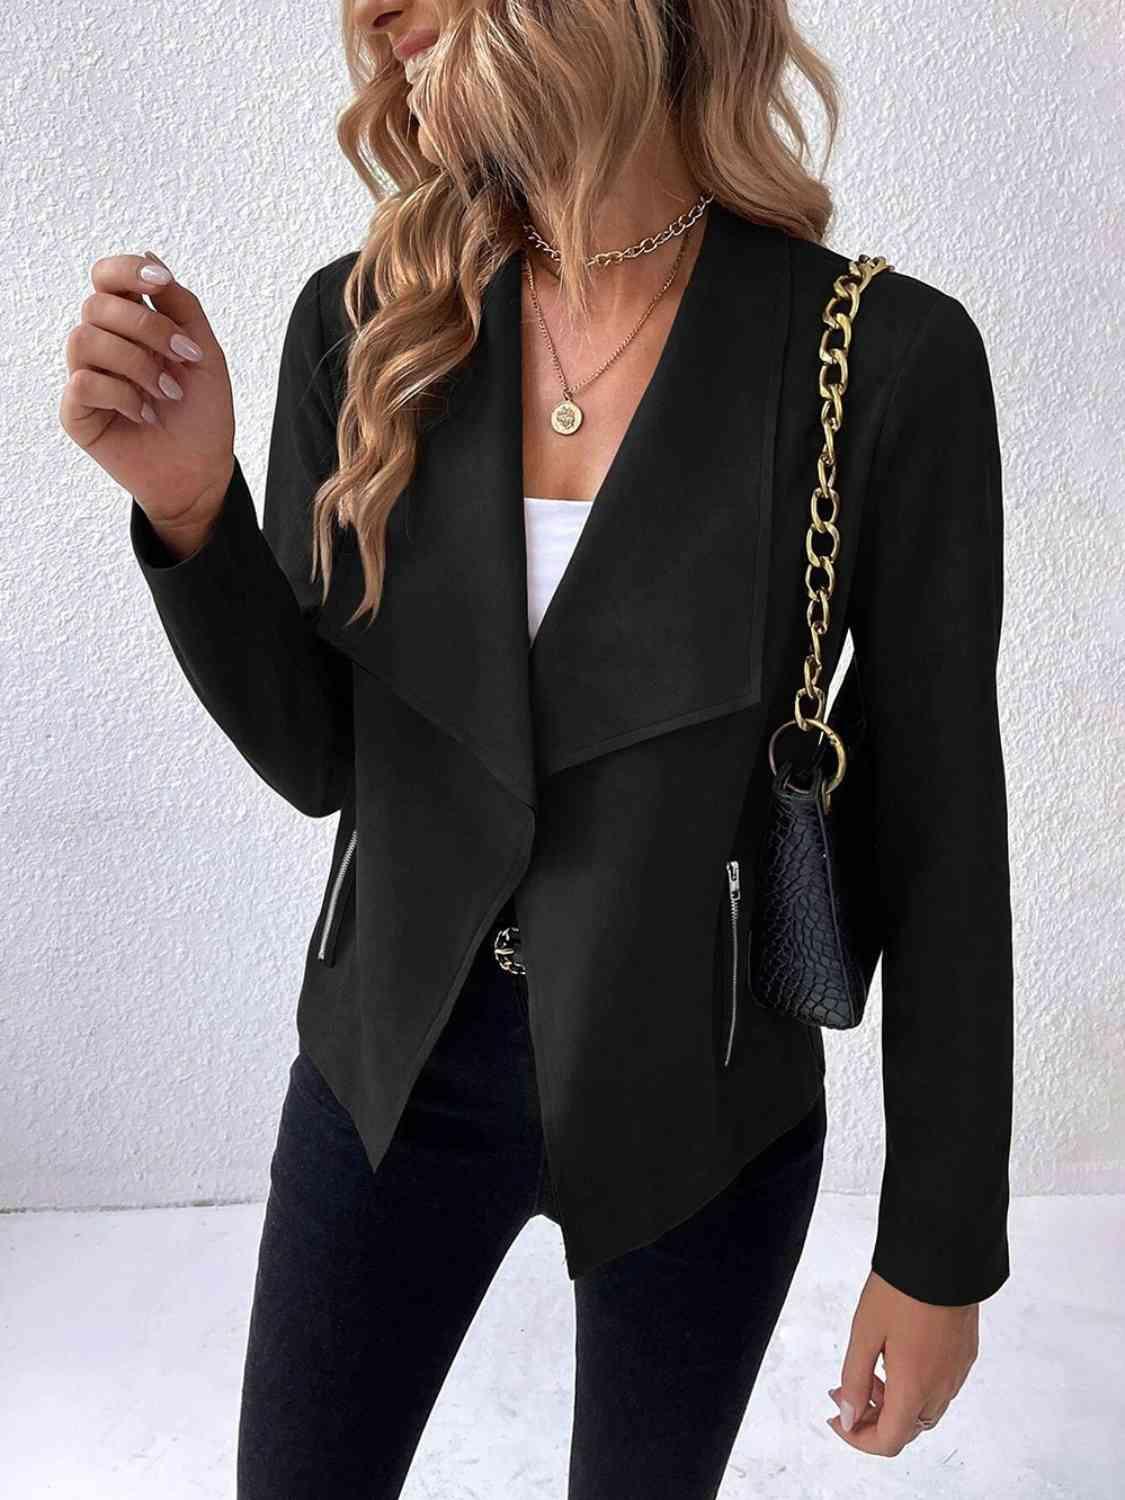 a woman wearing a black blazer and jeans